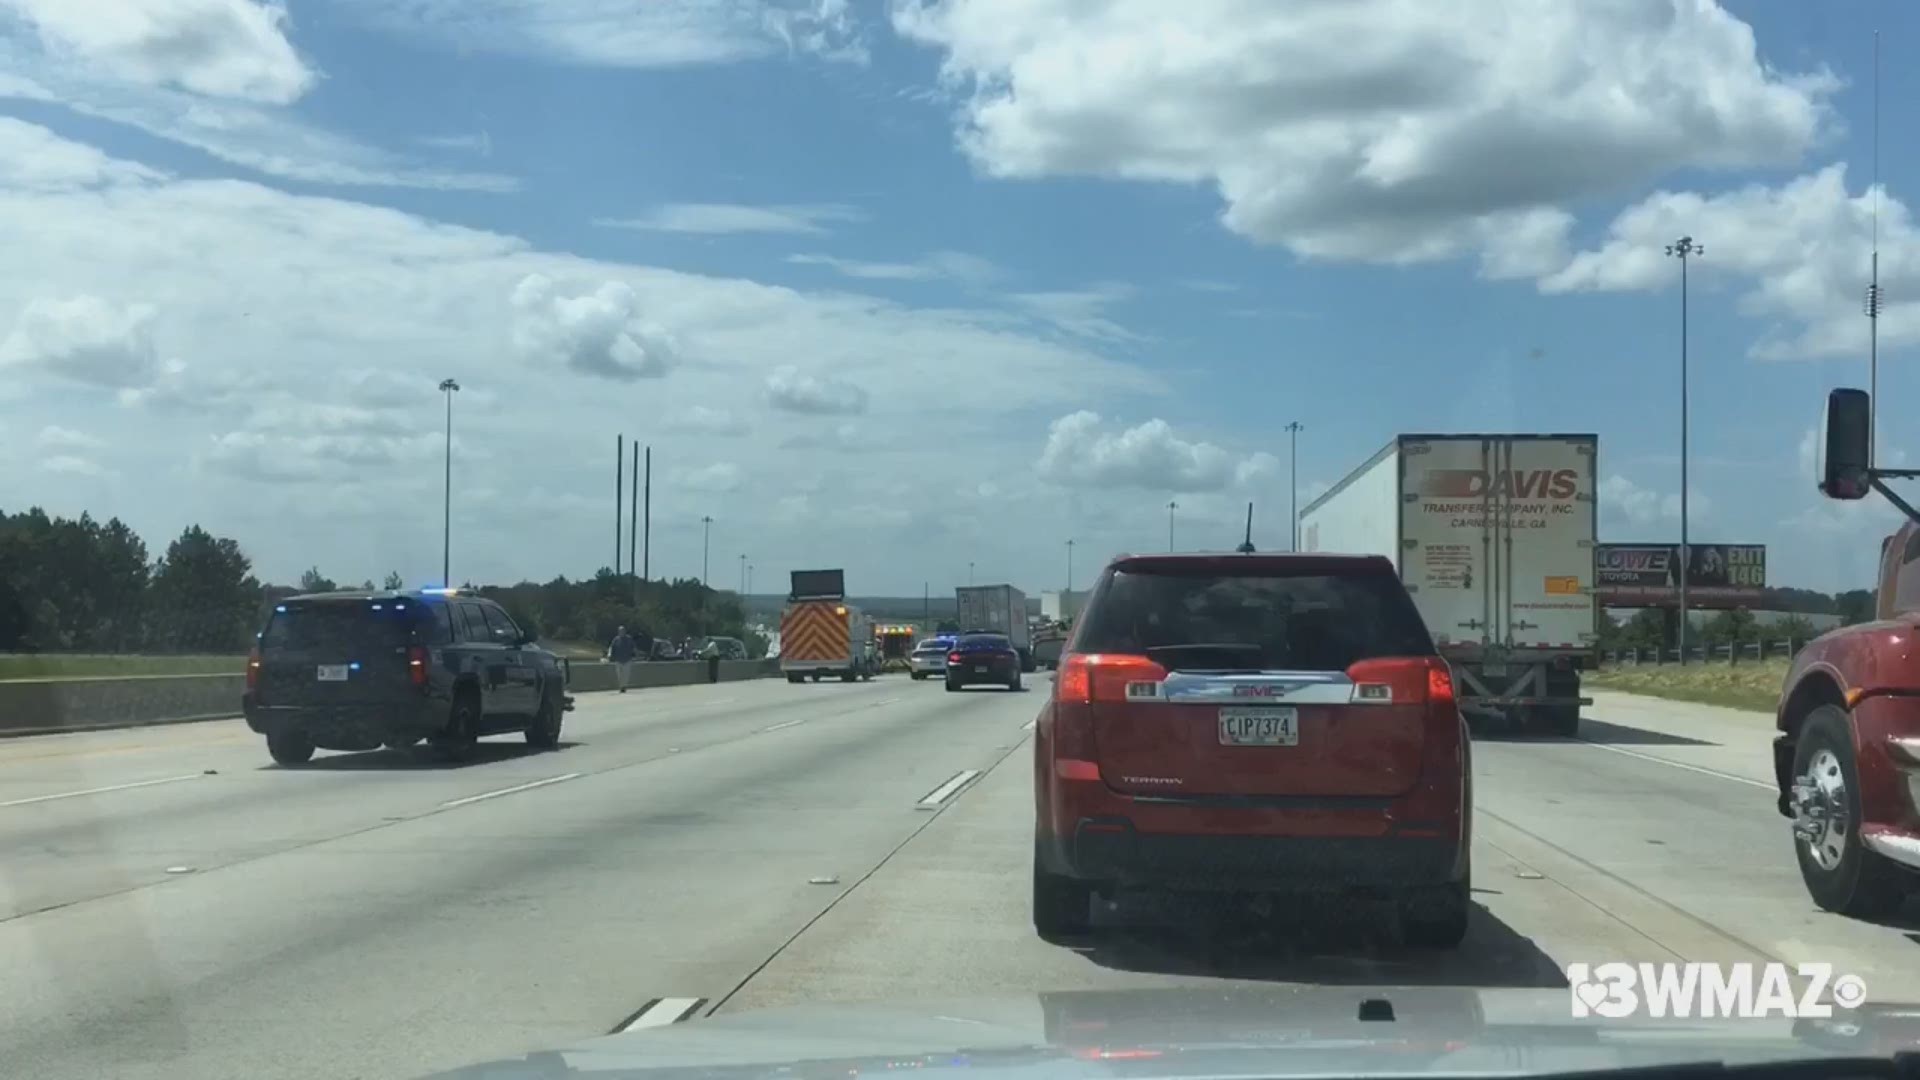 According to Georgia 511, a wreck involving two cars and one truck is blocking the three left lanes on I-75 South near Hartley Bridge Road